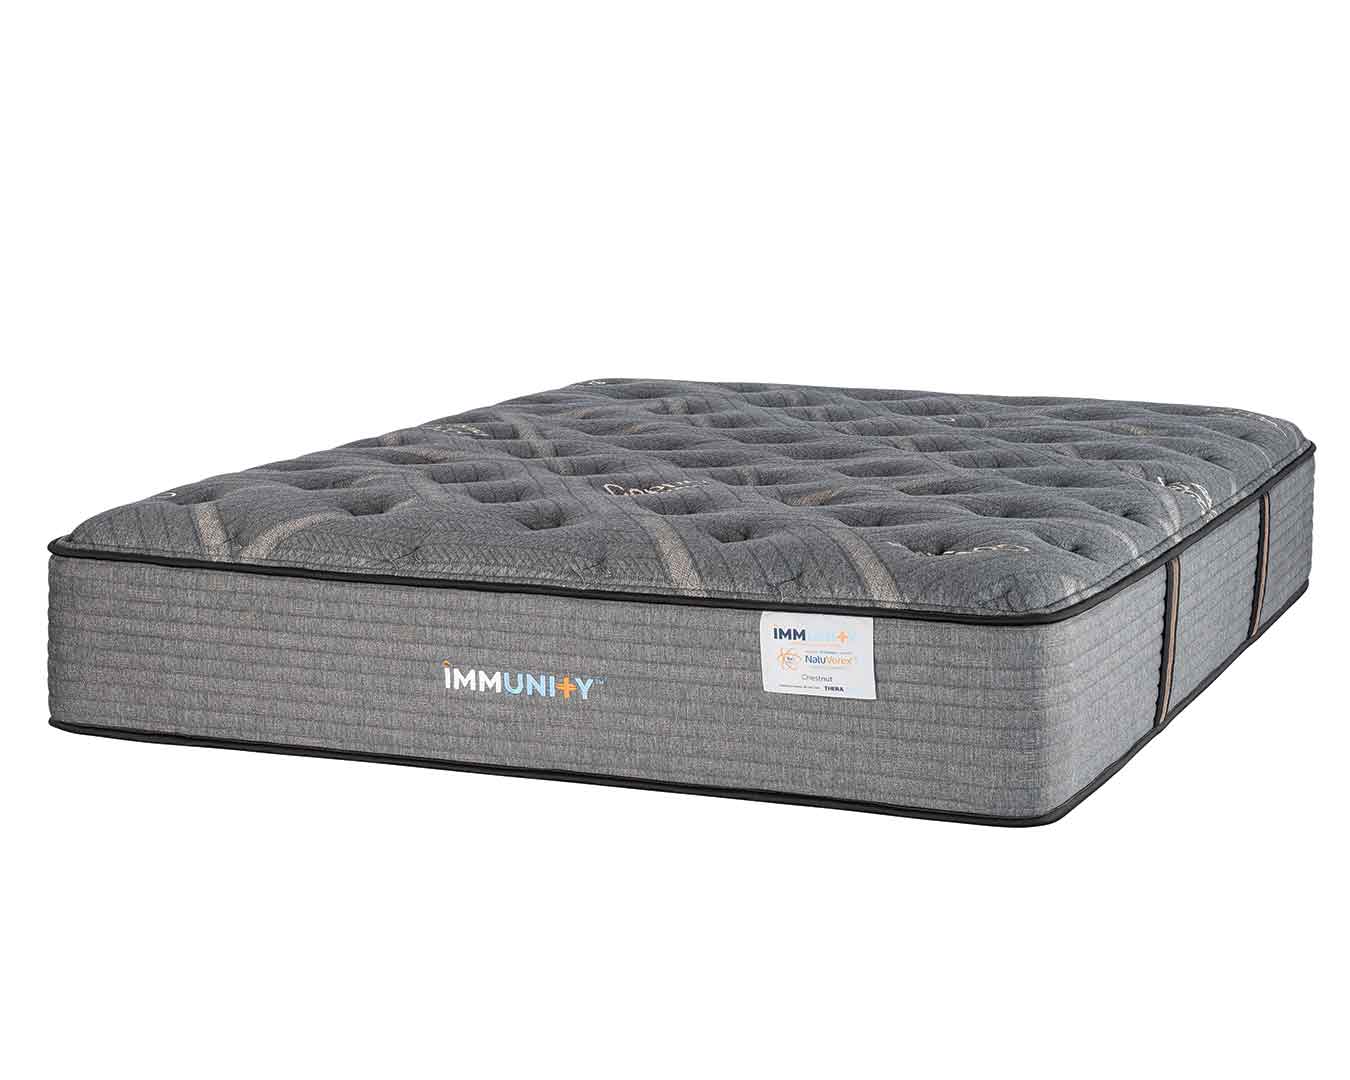 Immunity Chestnut copper mattress at an angle with a white background.